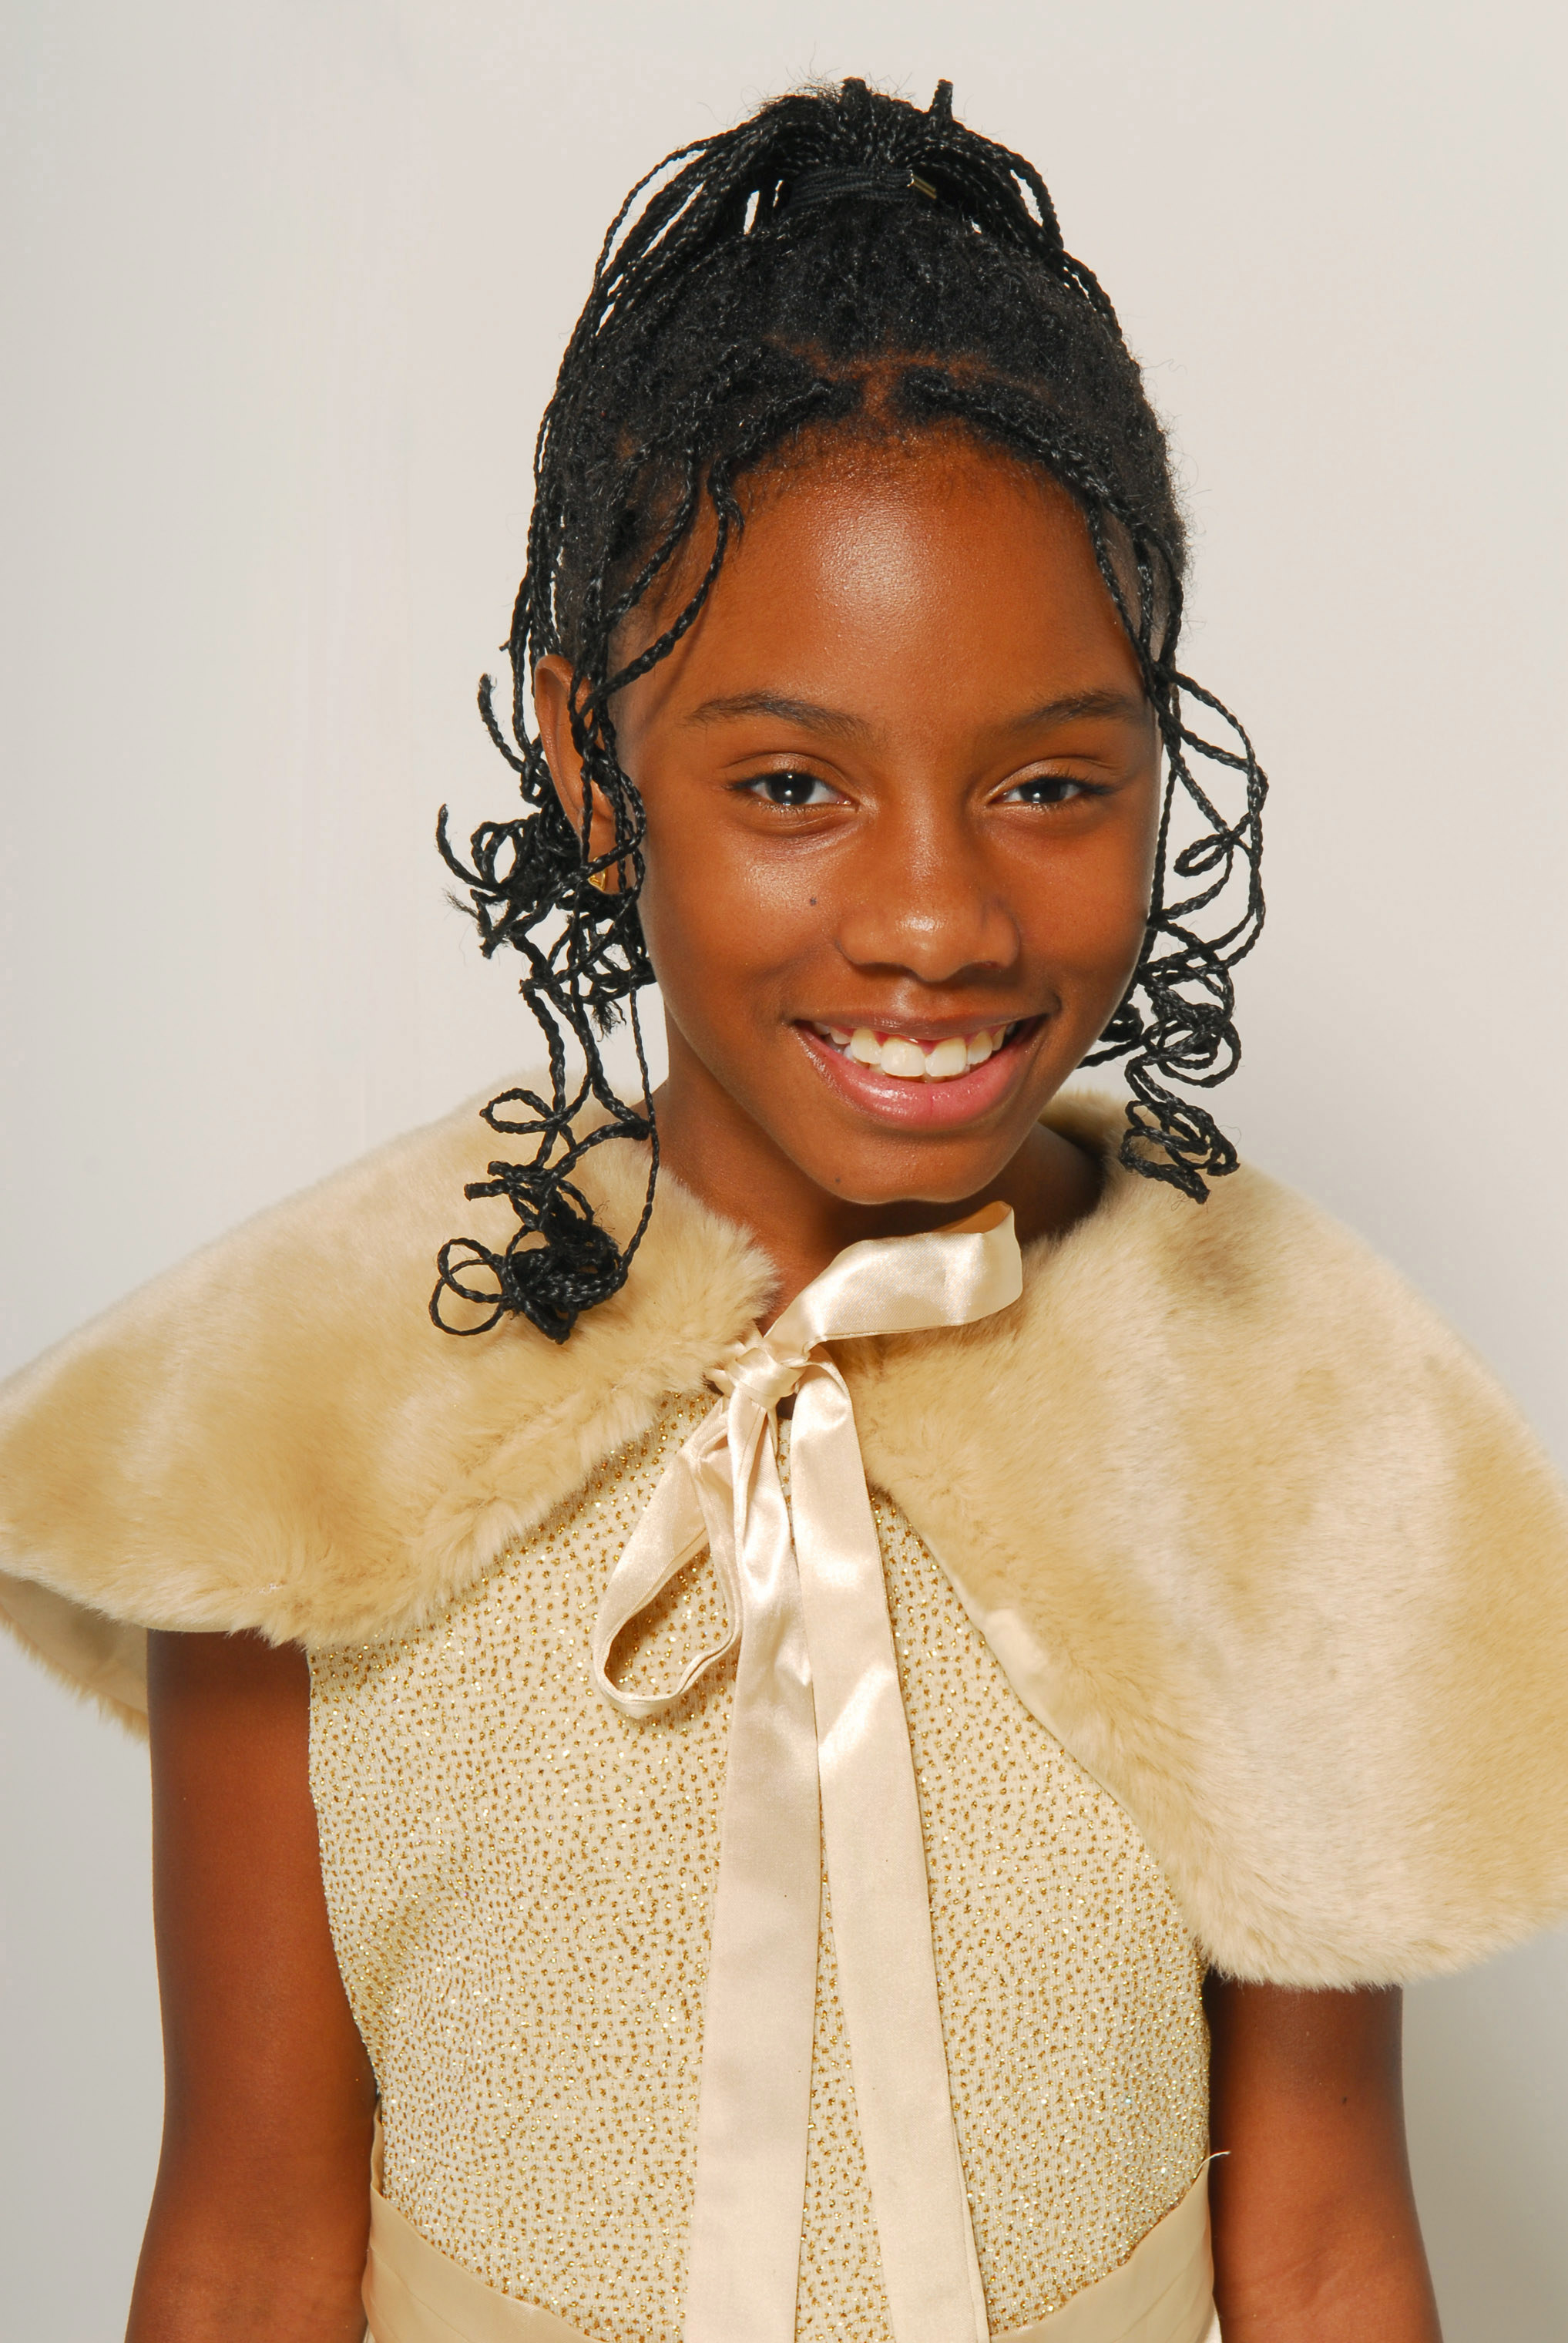 Imani Hakim attends The NAACP Image Awards in 2006